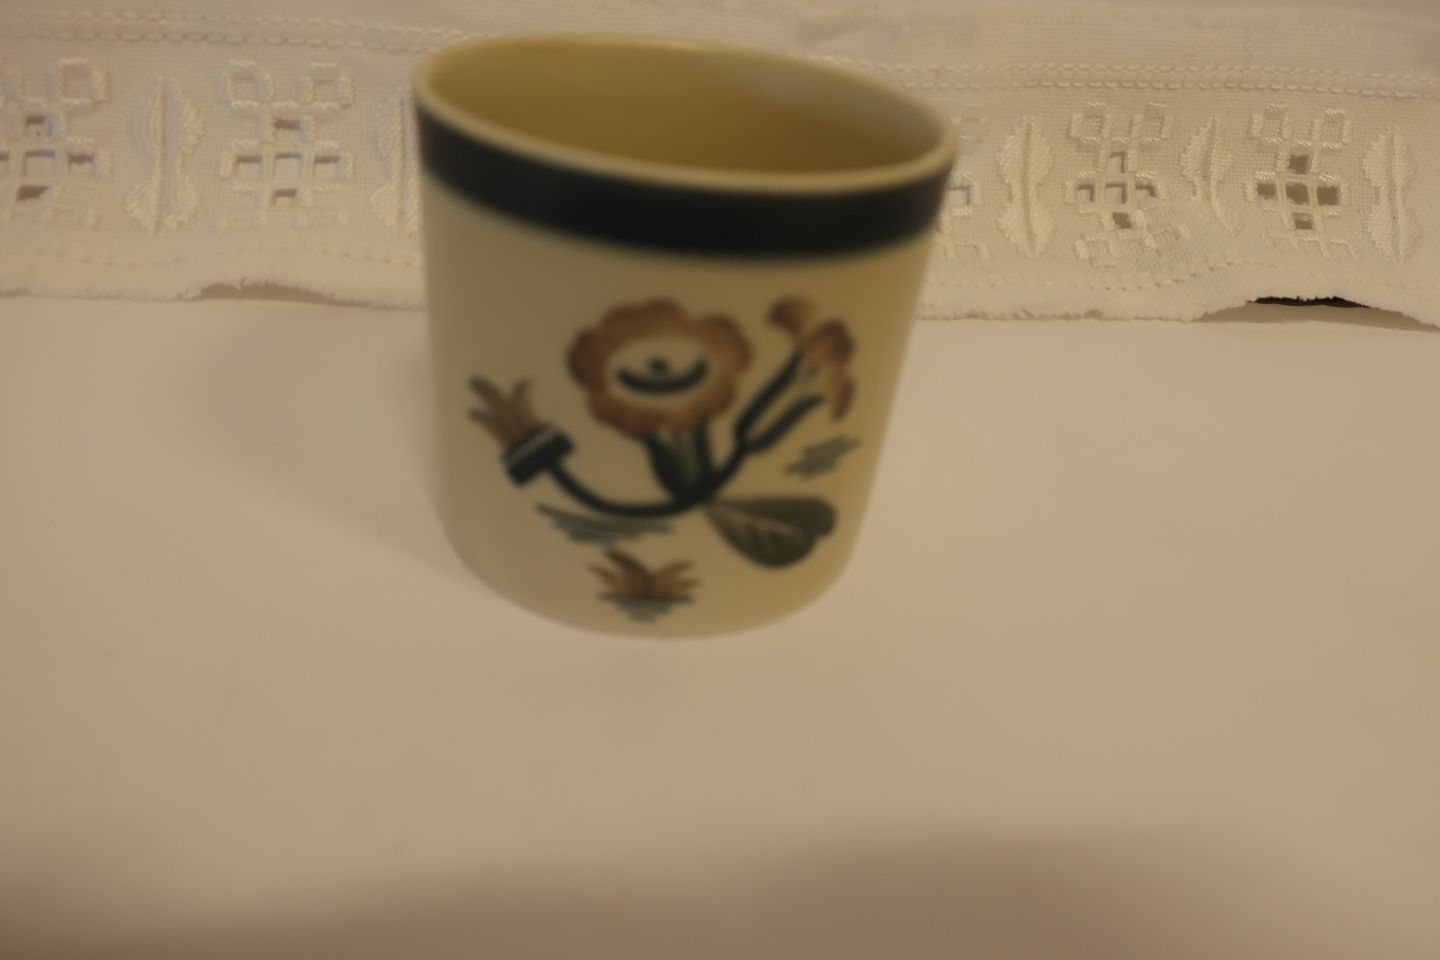 WorldAntique.net - Cup from Aluminia/RC Royal Copenhagen * Porcelain with a dim glaze * with and